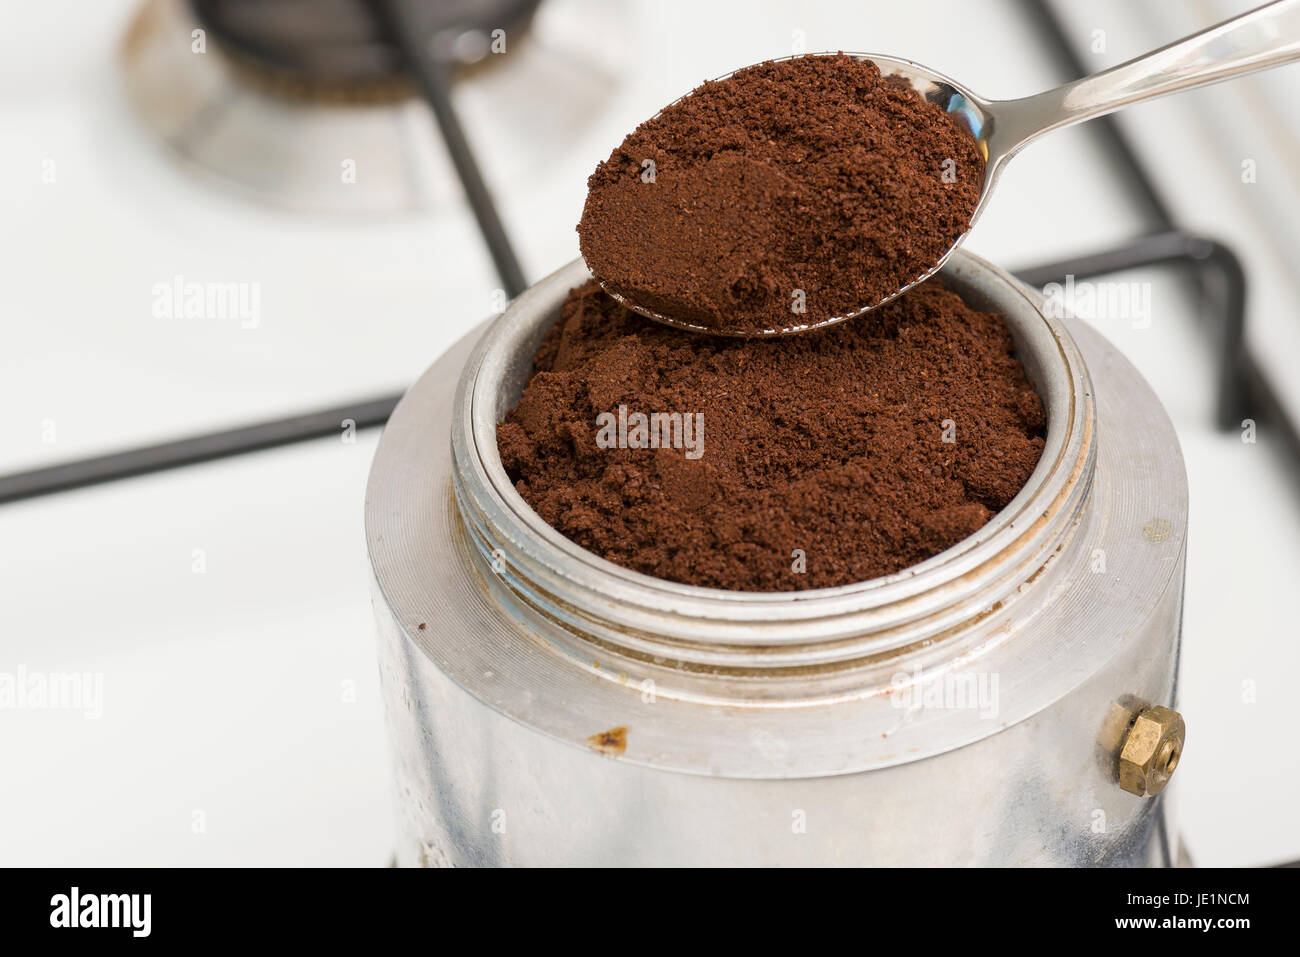 Fill the mocha with a teaspoon to make coffee. Stock Photo